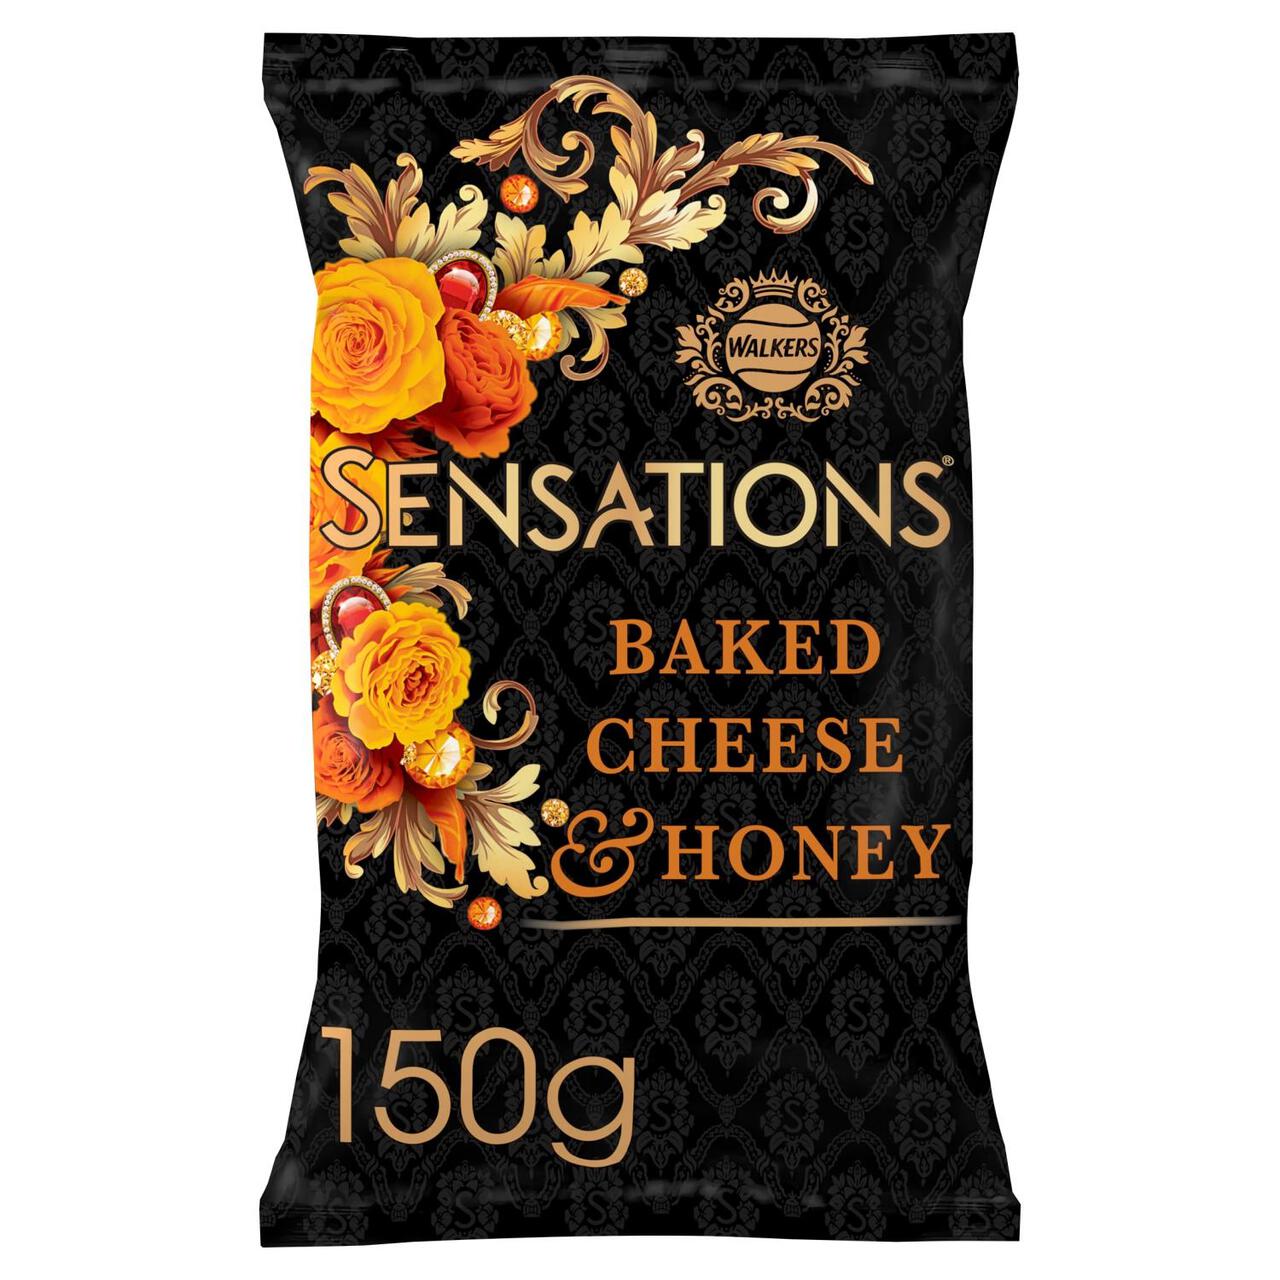 Sensations Jubilee Limited Edition Baked Cheese & Honey Sharing Crisps 150g